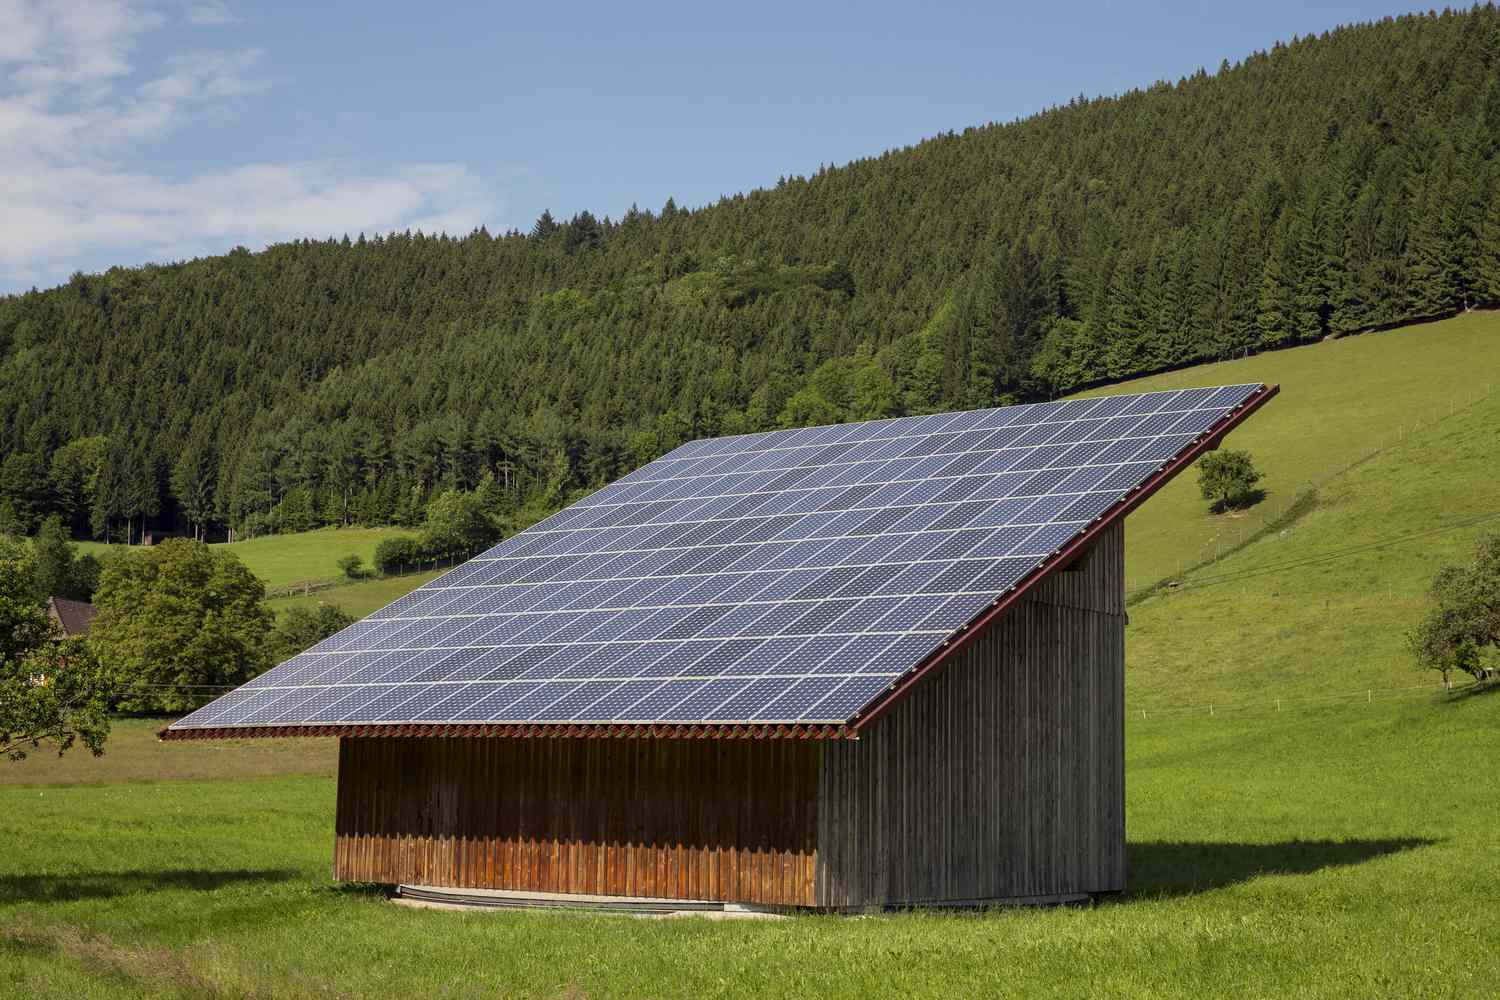 How To Set Up Solar Power For A Shed